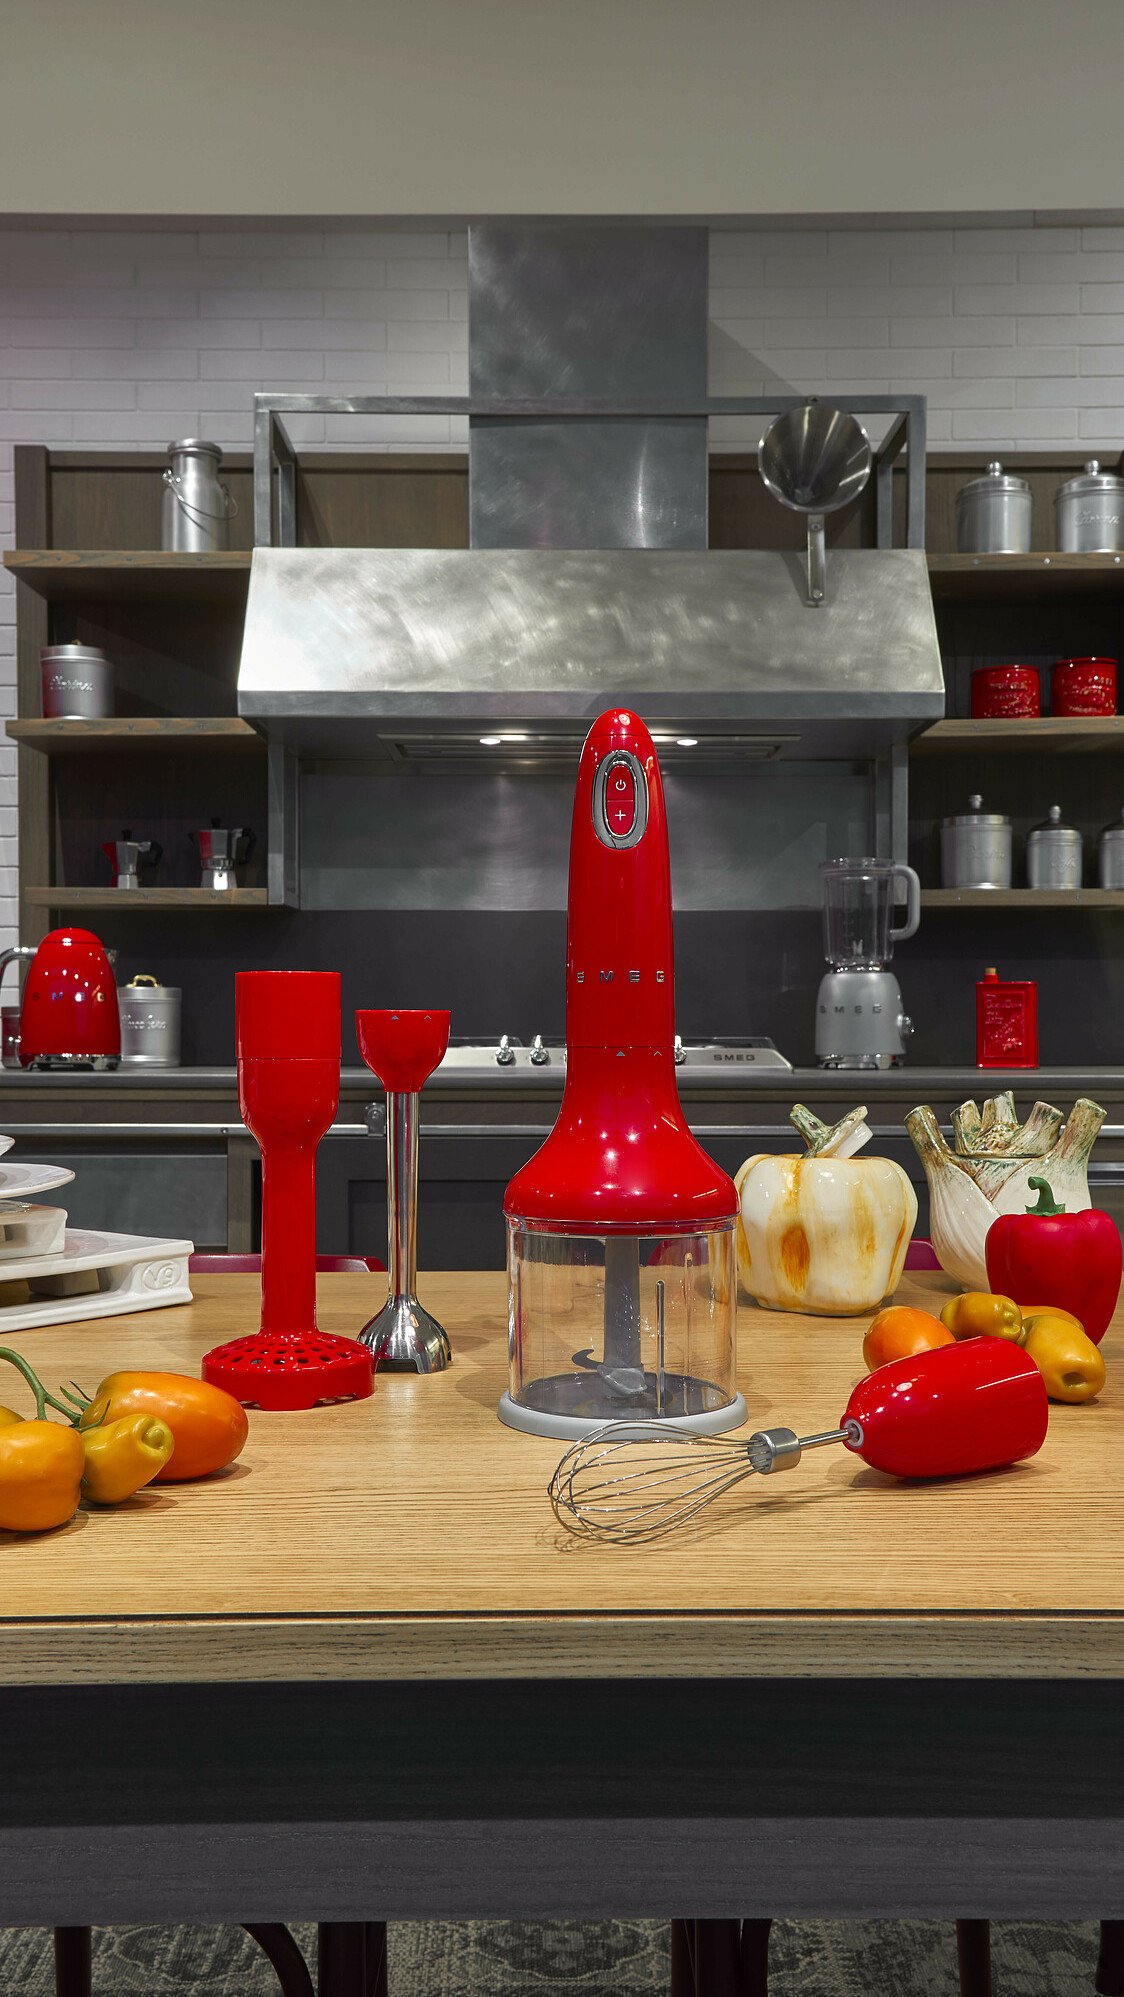 Smeg Red 50's Retro Style Hand Blender with Accessories